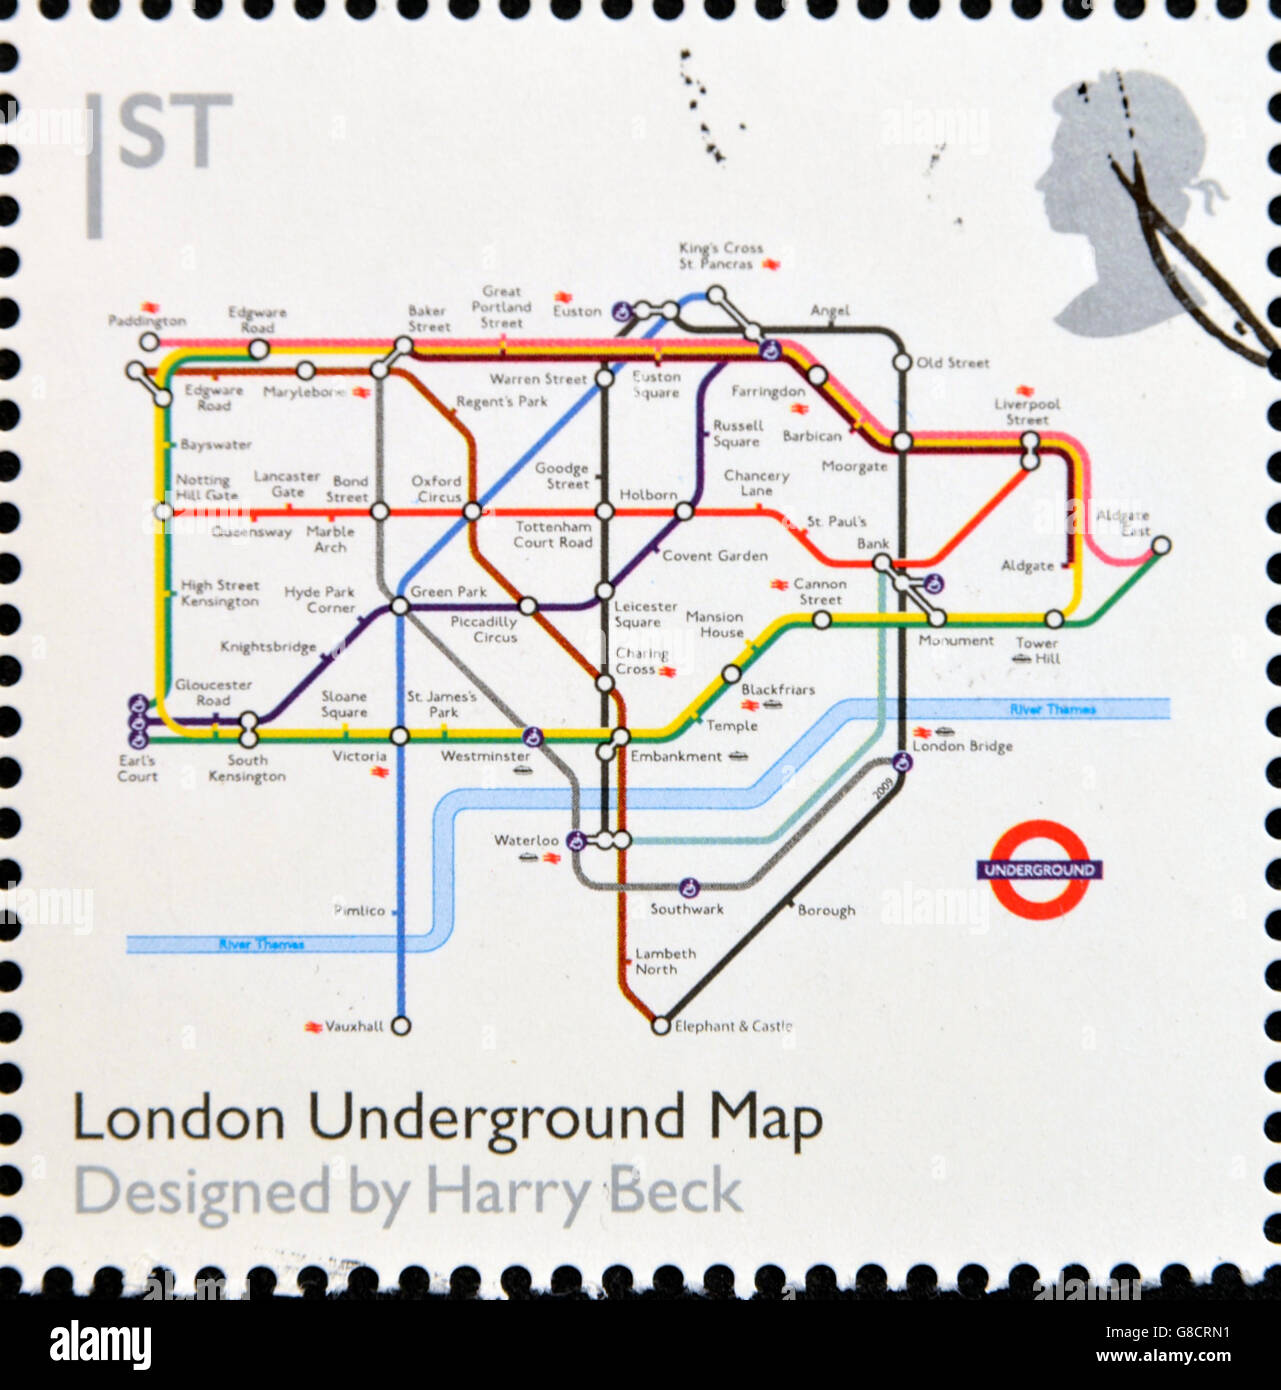 UNITED KINGDOM - CIRCA 2009: A stamp printed in Great Britain dedicates to Design Classics, shows London Underground Map by Harr Stock Photo